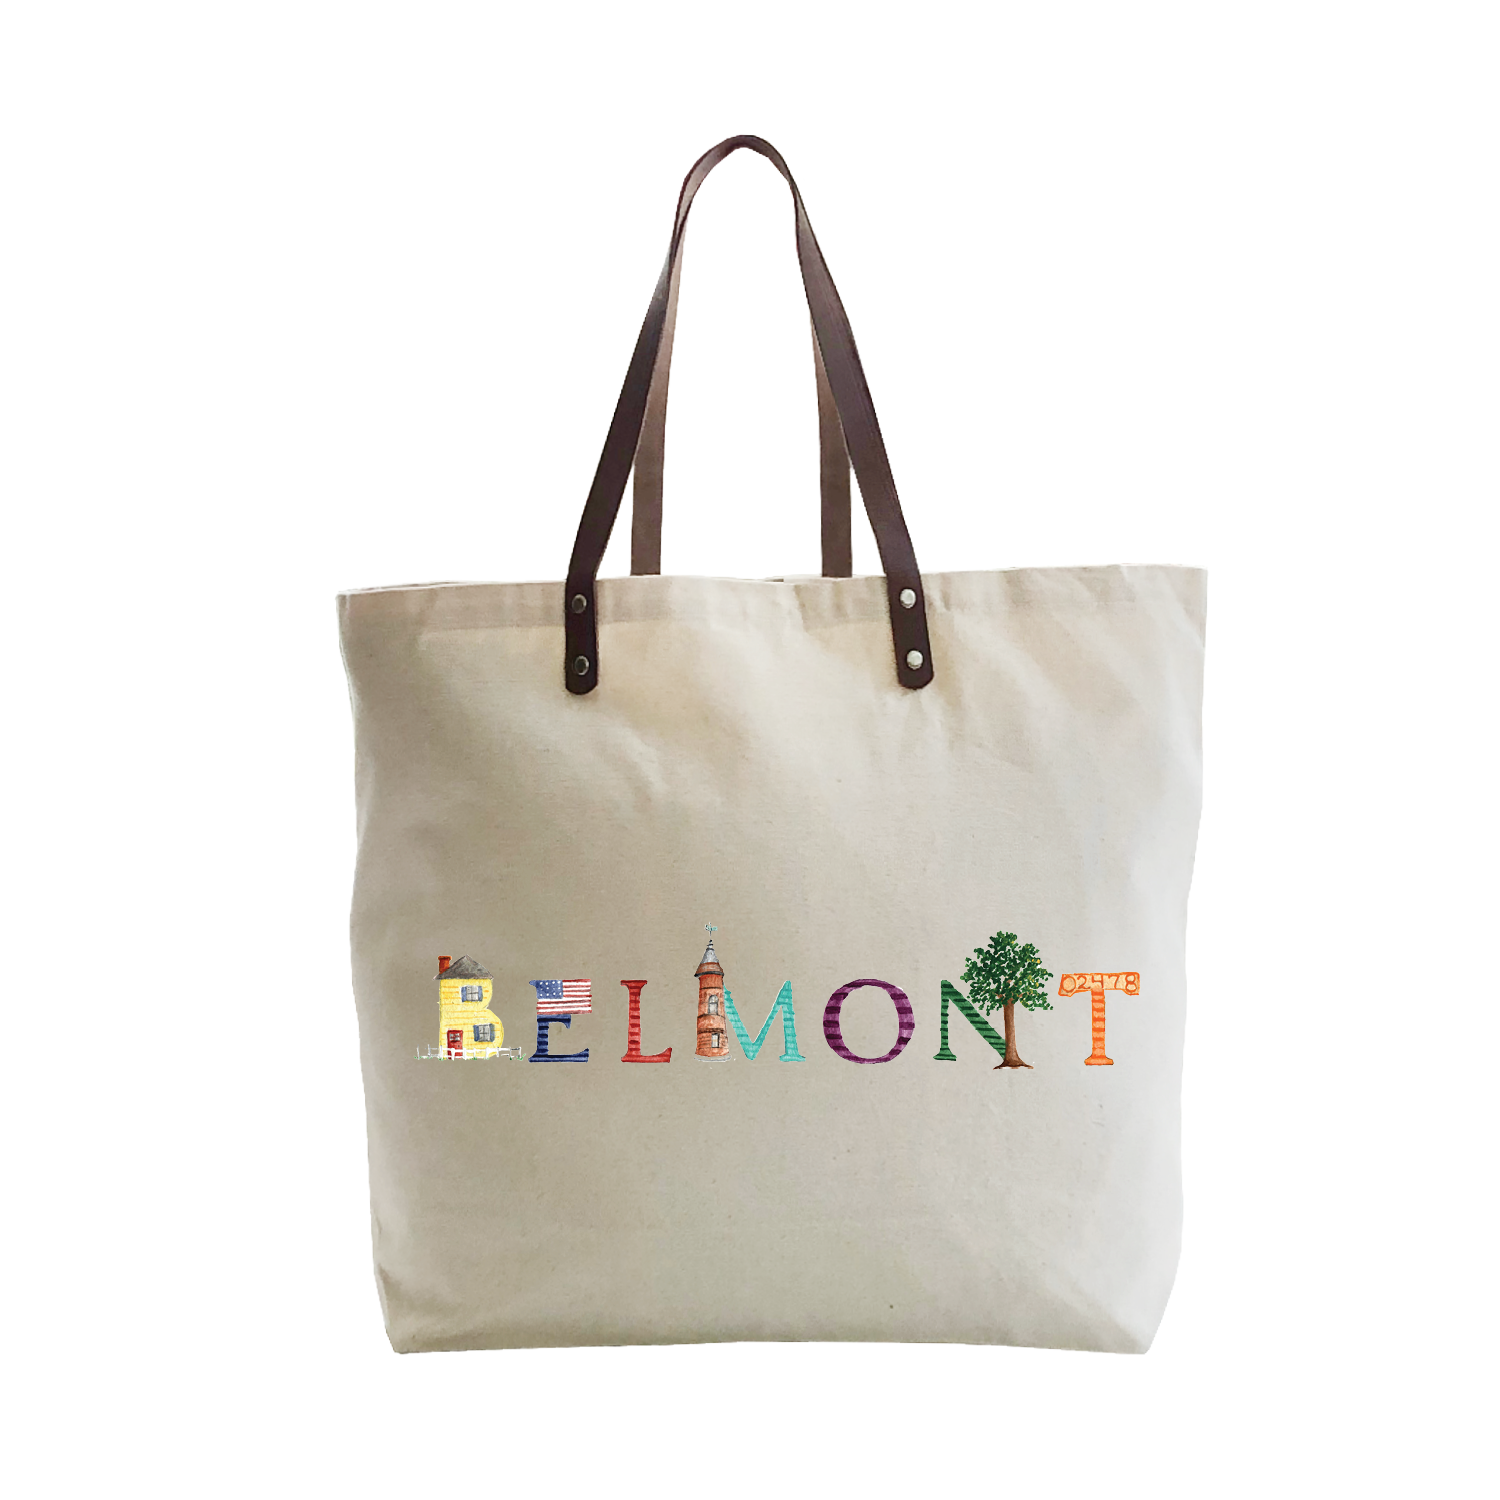 belmont large tote